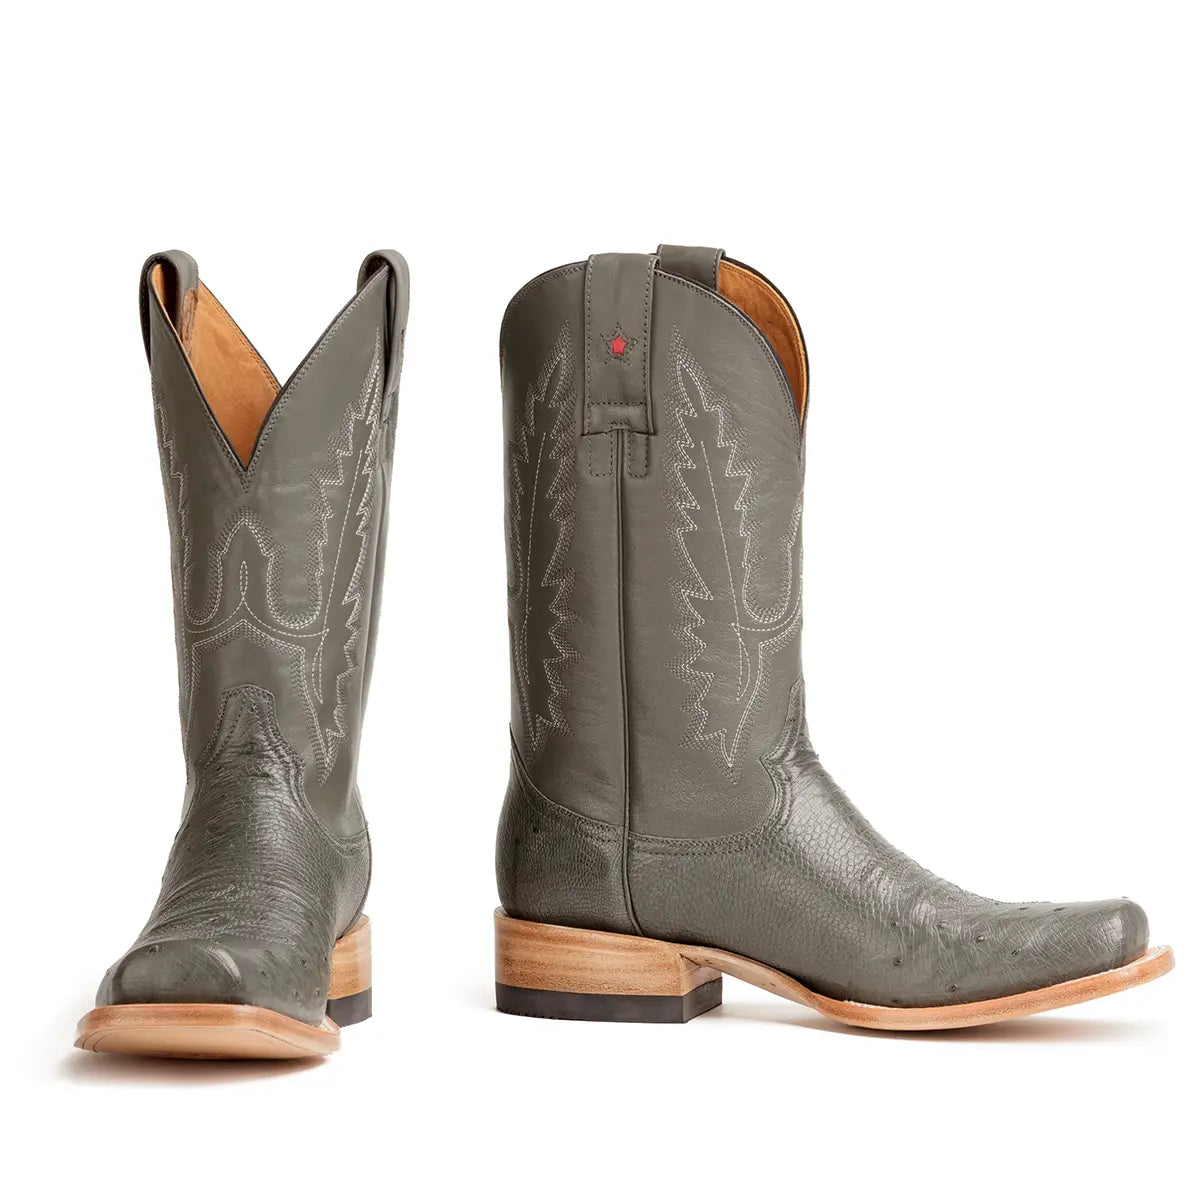 Arroyo Smooth Ostrich Stockman Square Toe Boot - Grey